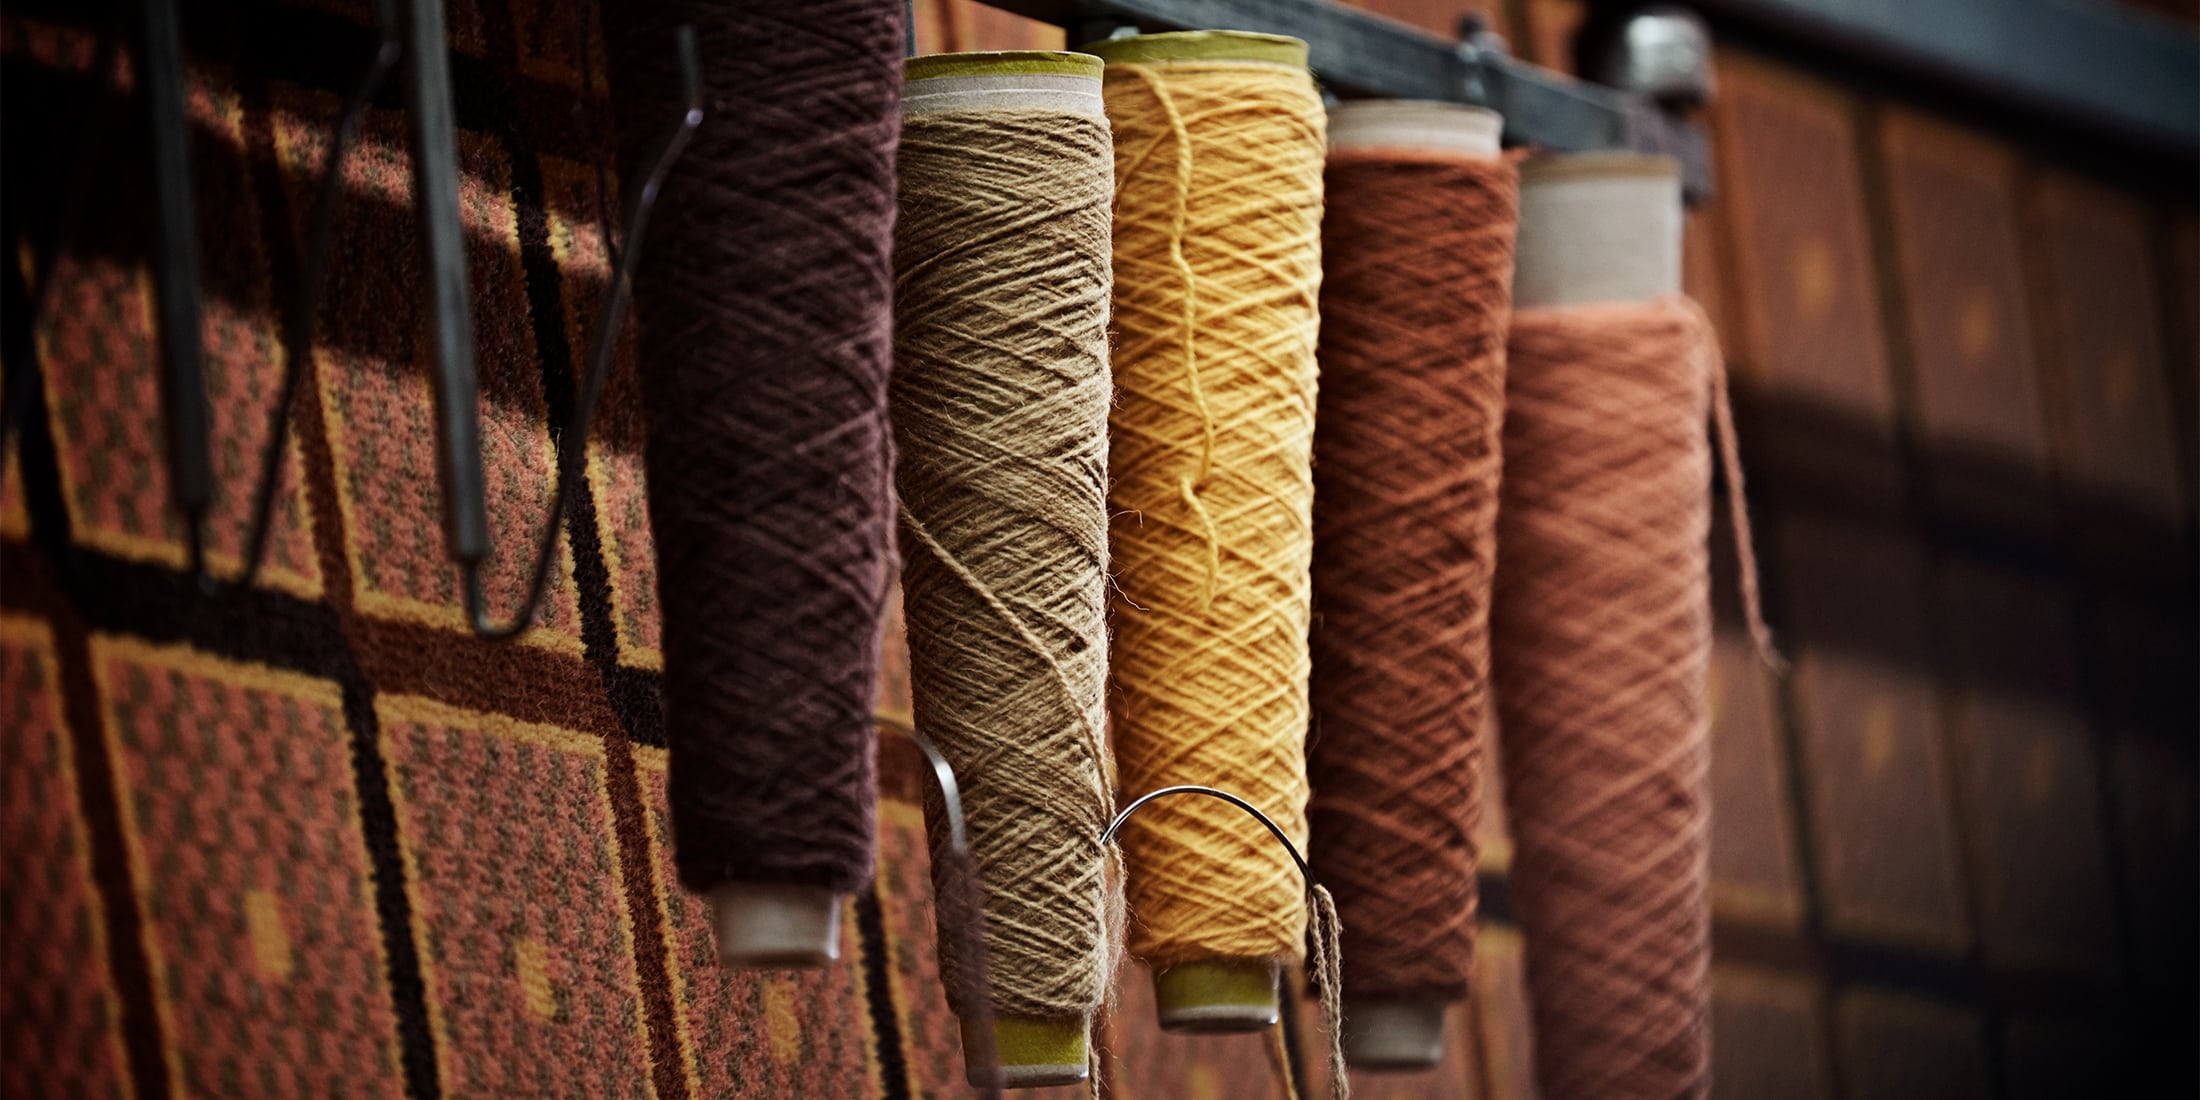 Innovation and quality are keywords in the production and development of Dansk Wilton carpets